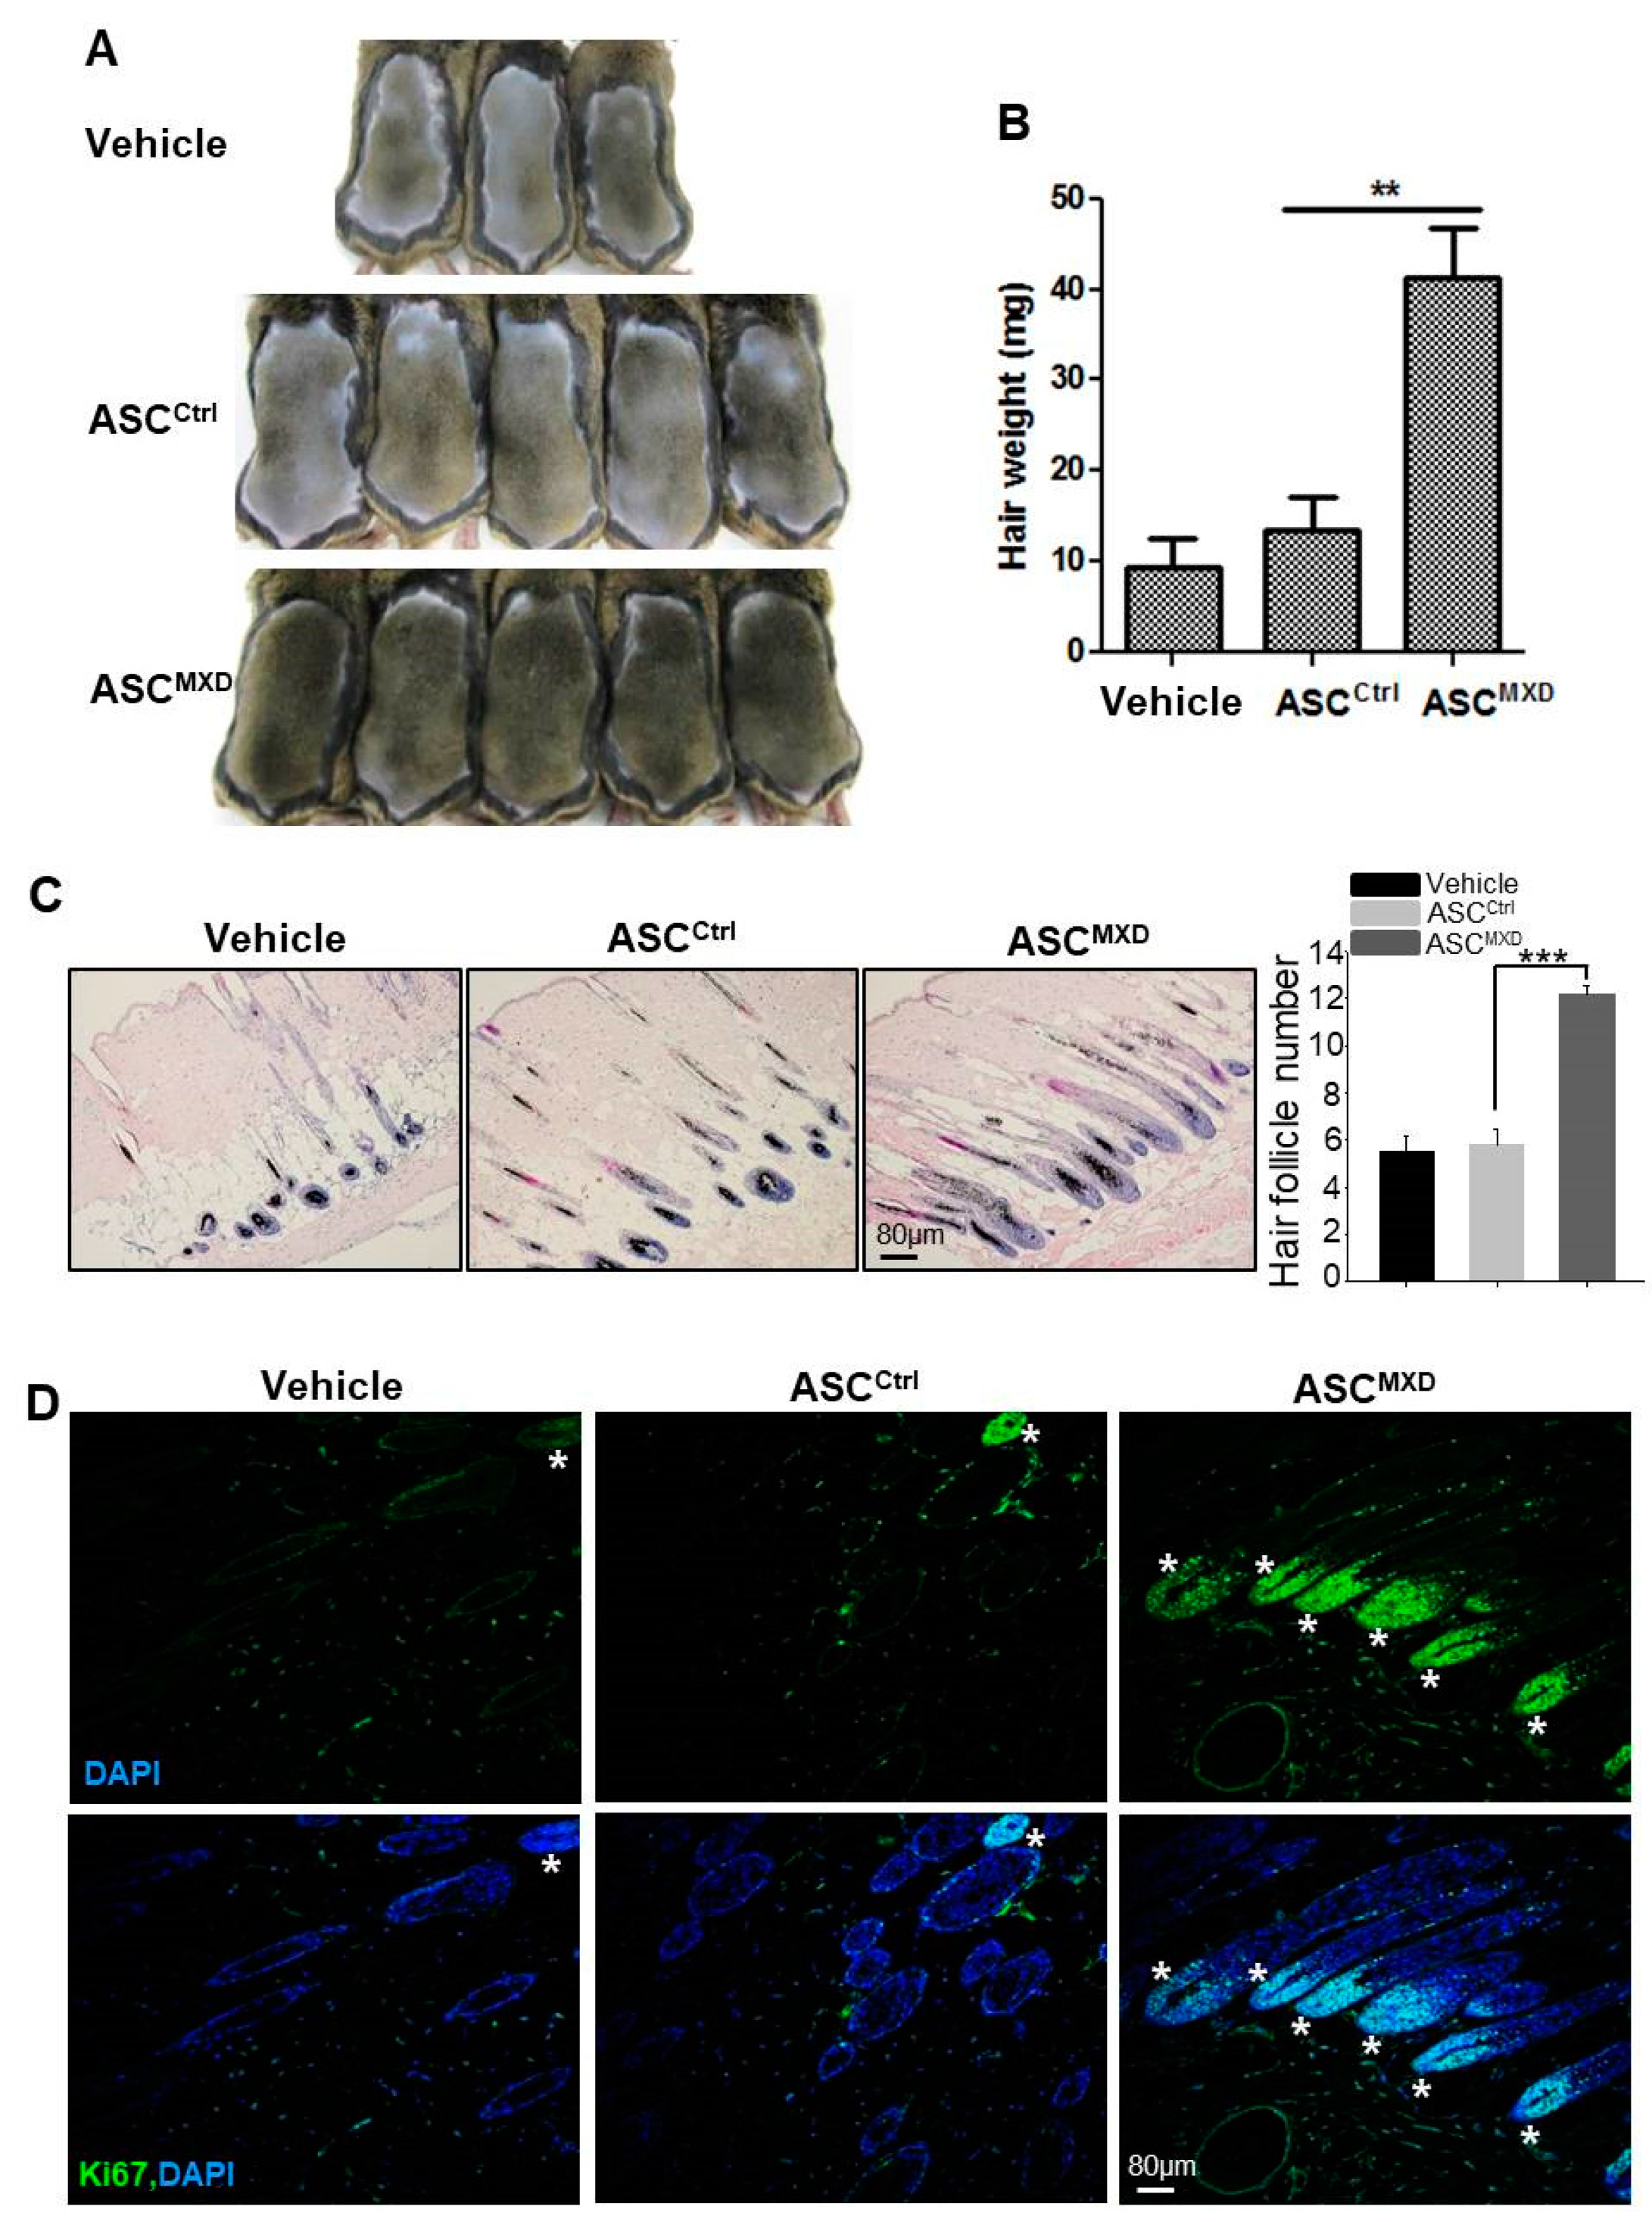 IJMS | Full-Text | Minoxidil Promotes Hair Growth through Stimulation Growth Factor Release from Adipose-Derived Stem Cells